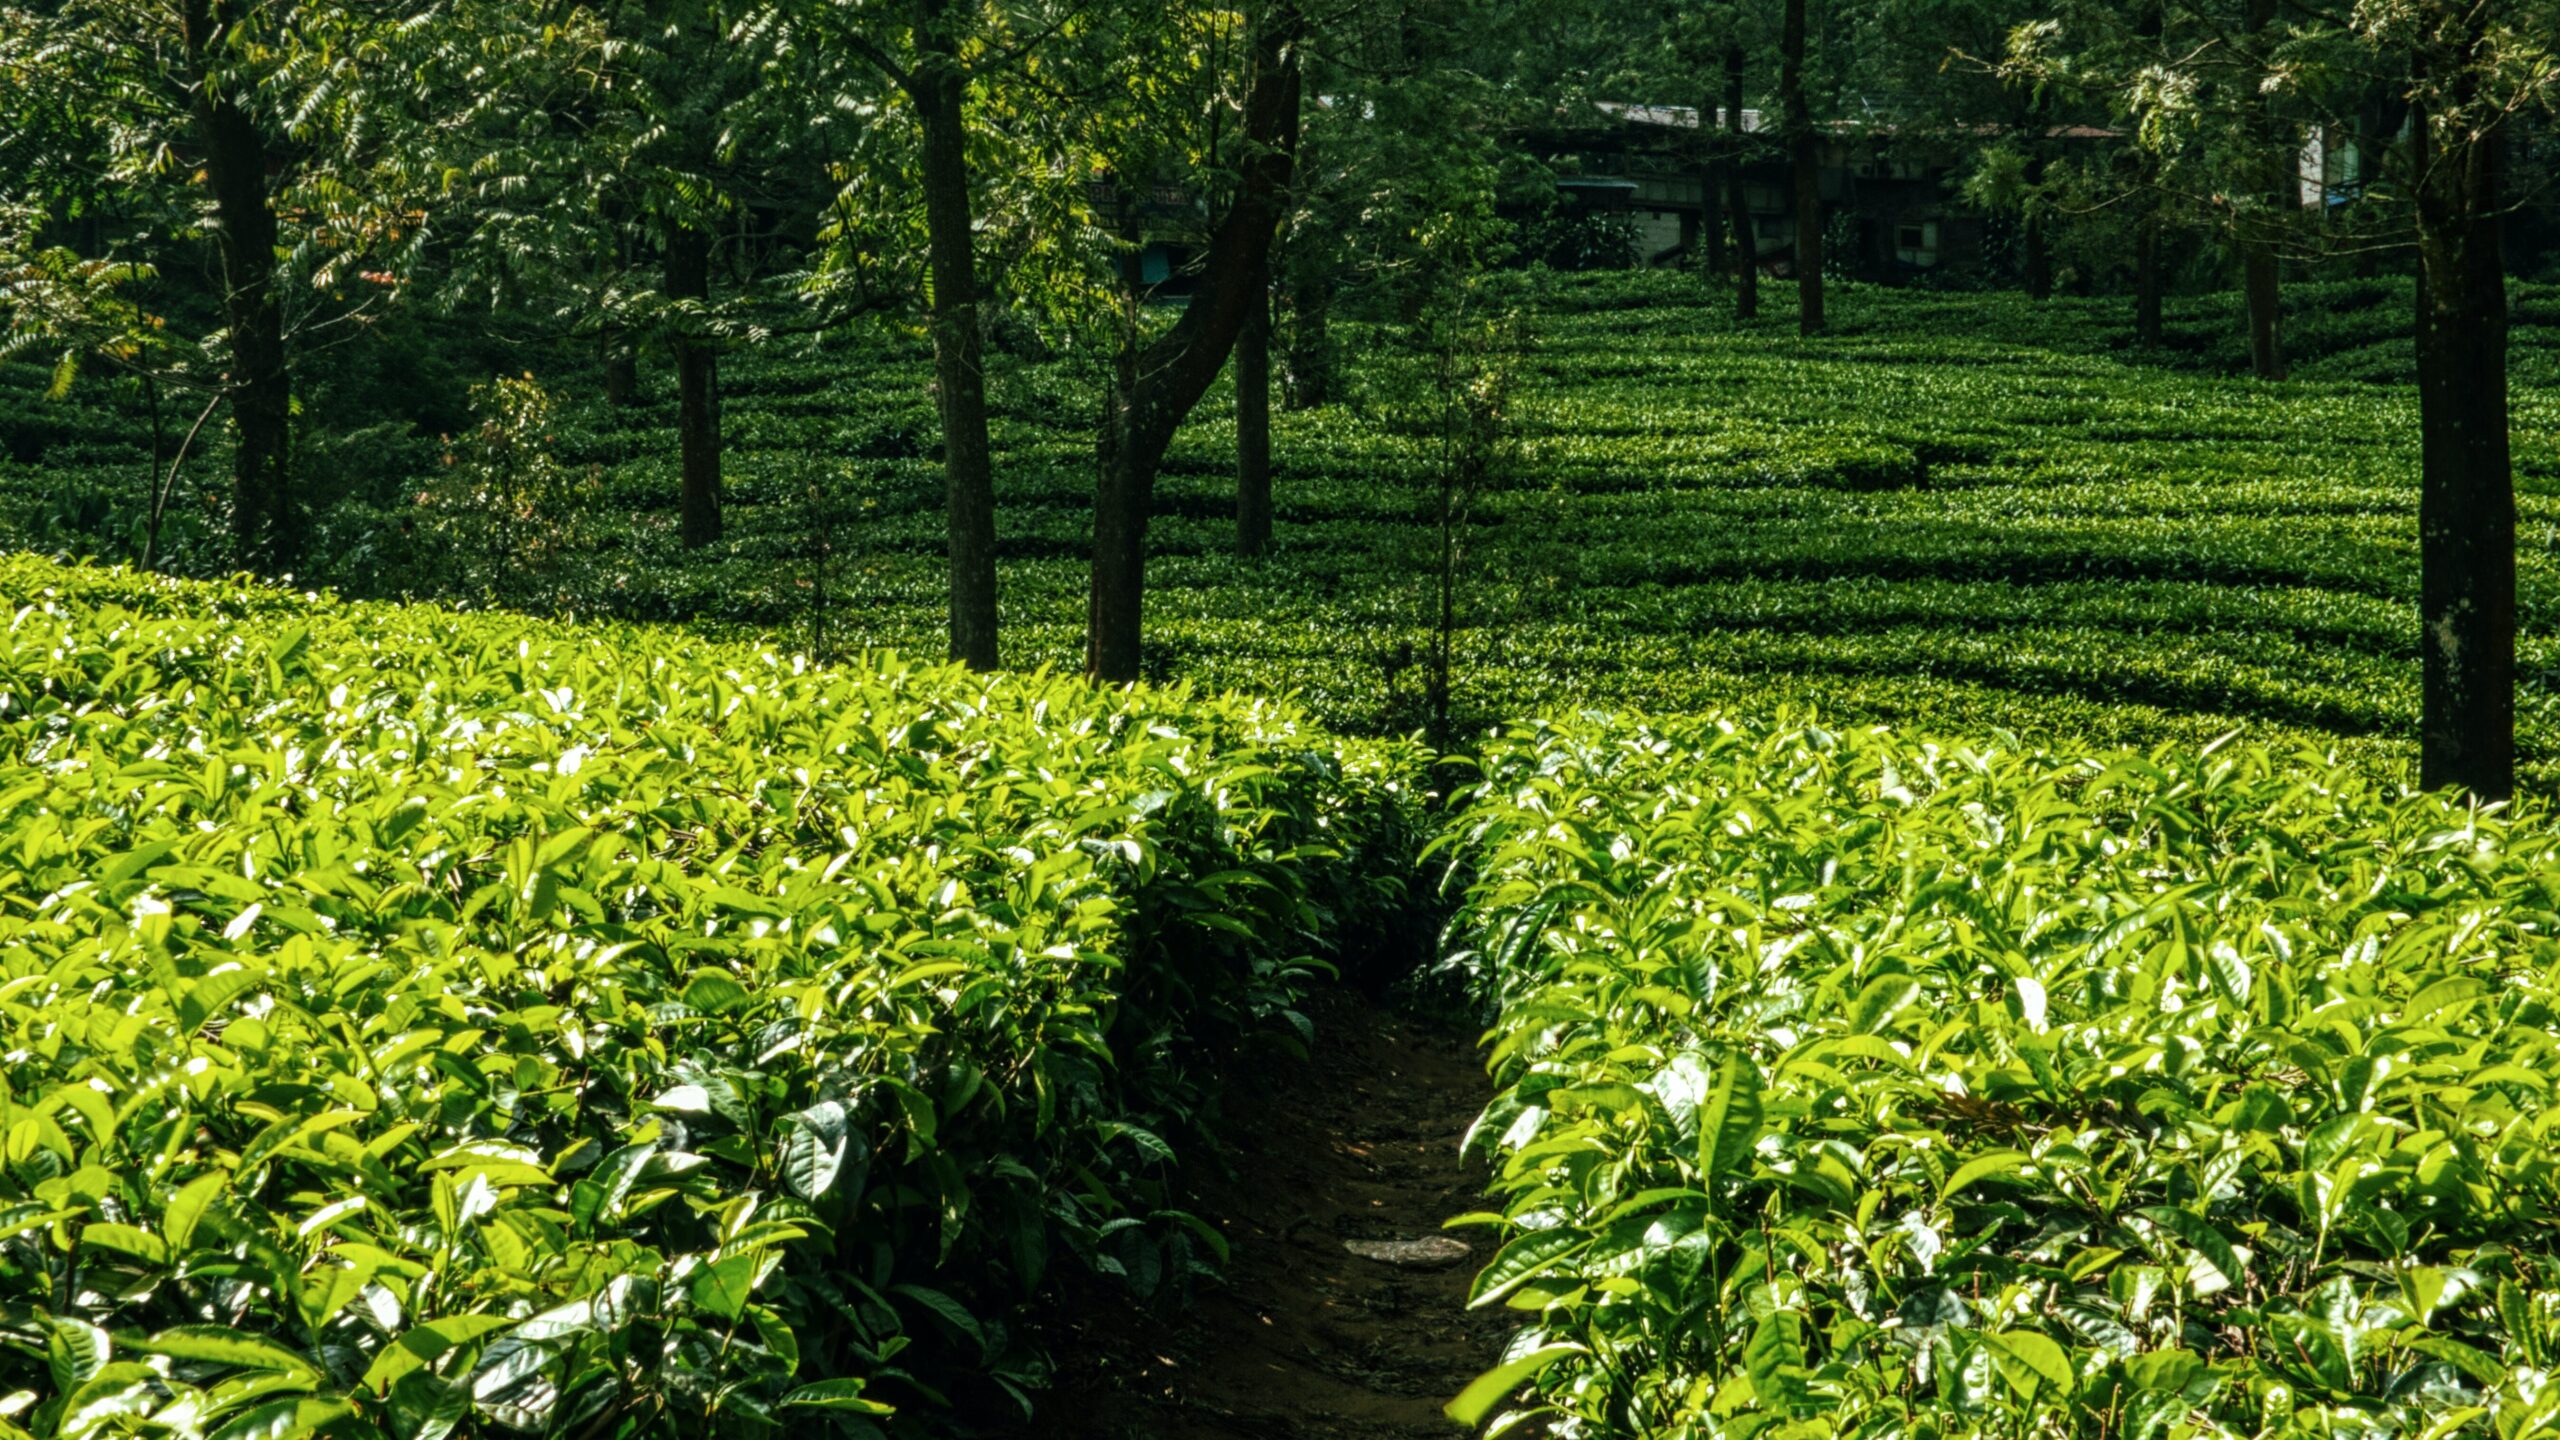 Orange Valley Tea Estate is one of the most popular places to visit in Darjeeling.